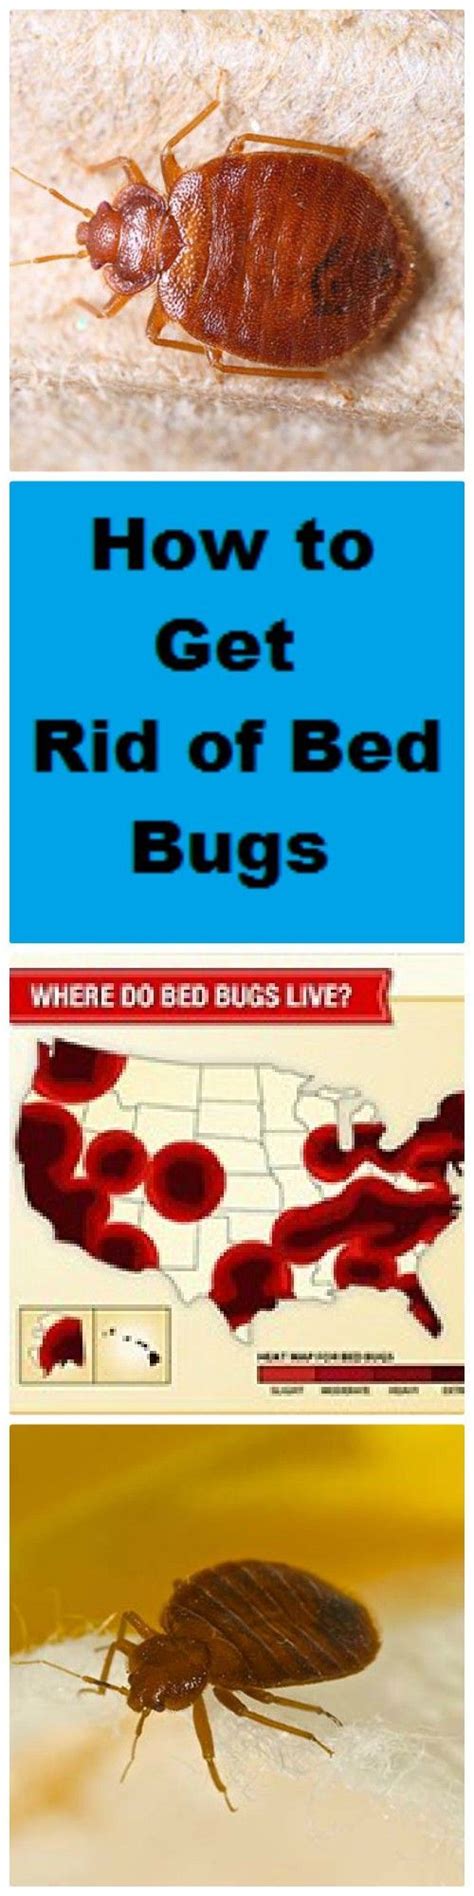 have bed bugs get rid of them quick with domyown s step by step guide we walk you through what